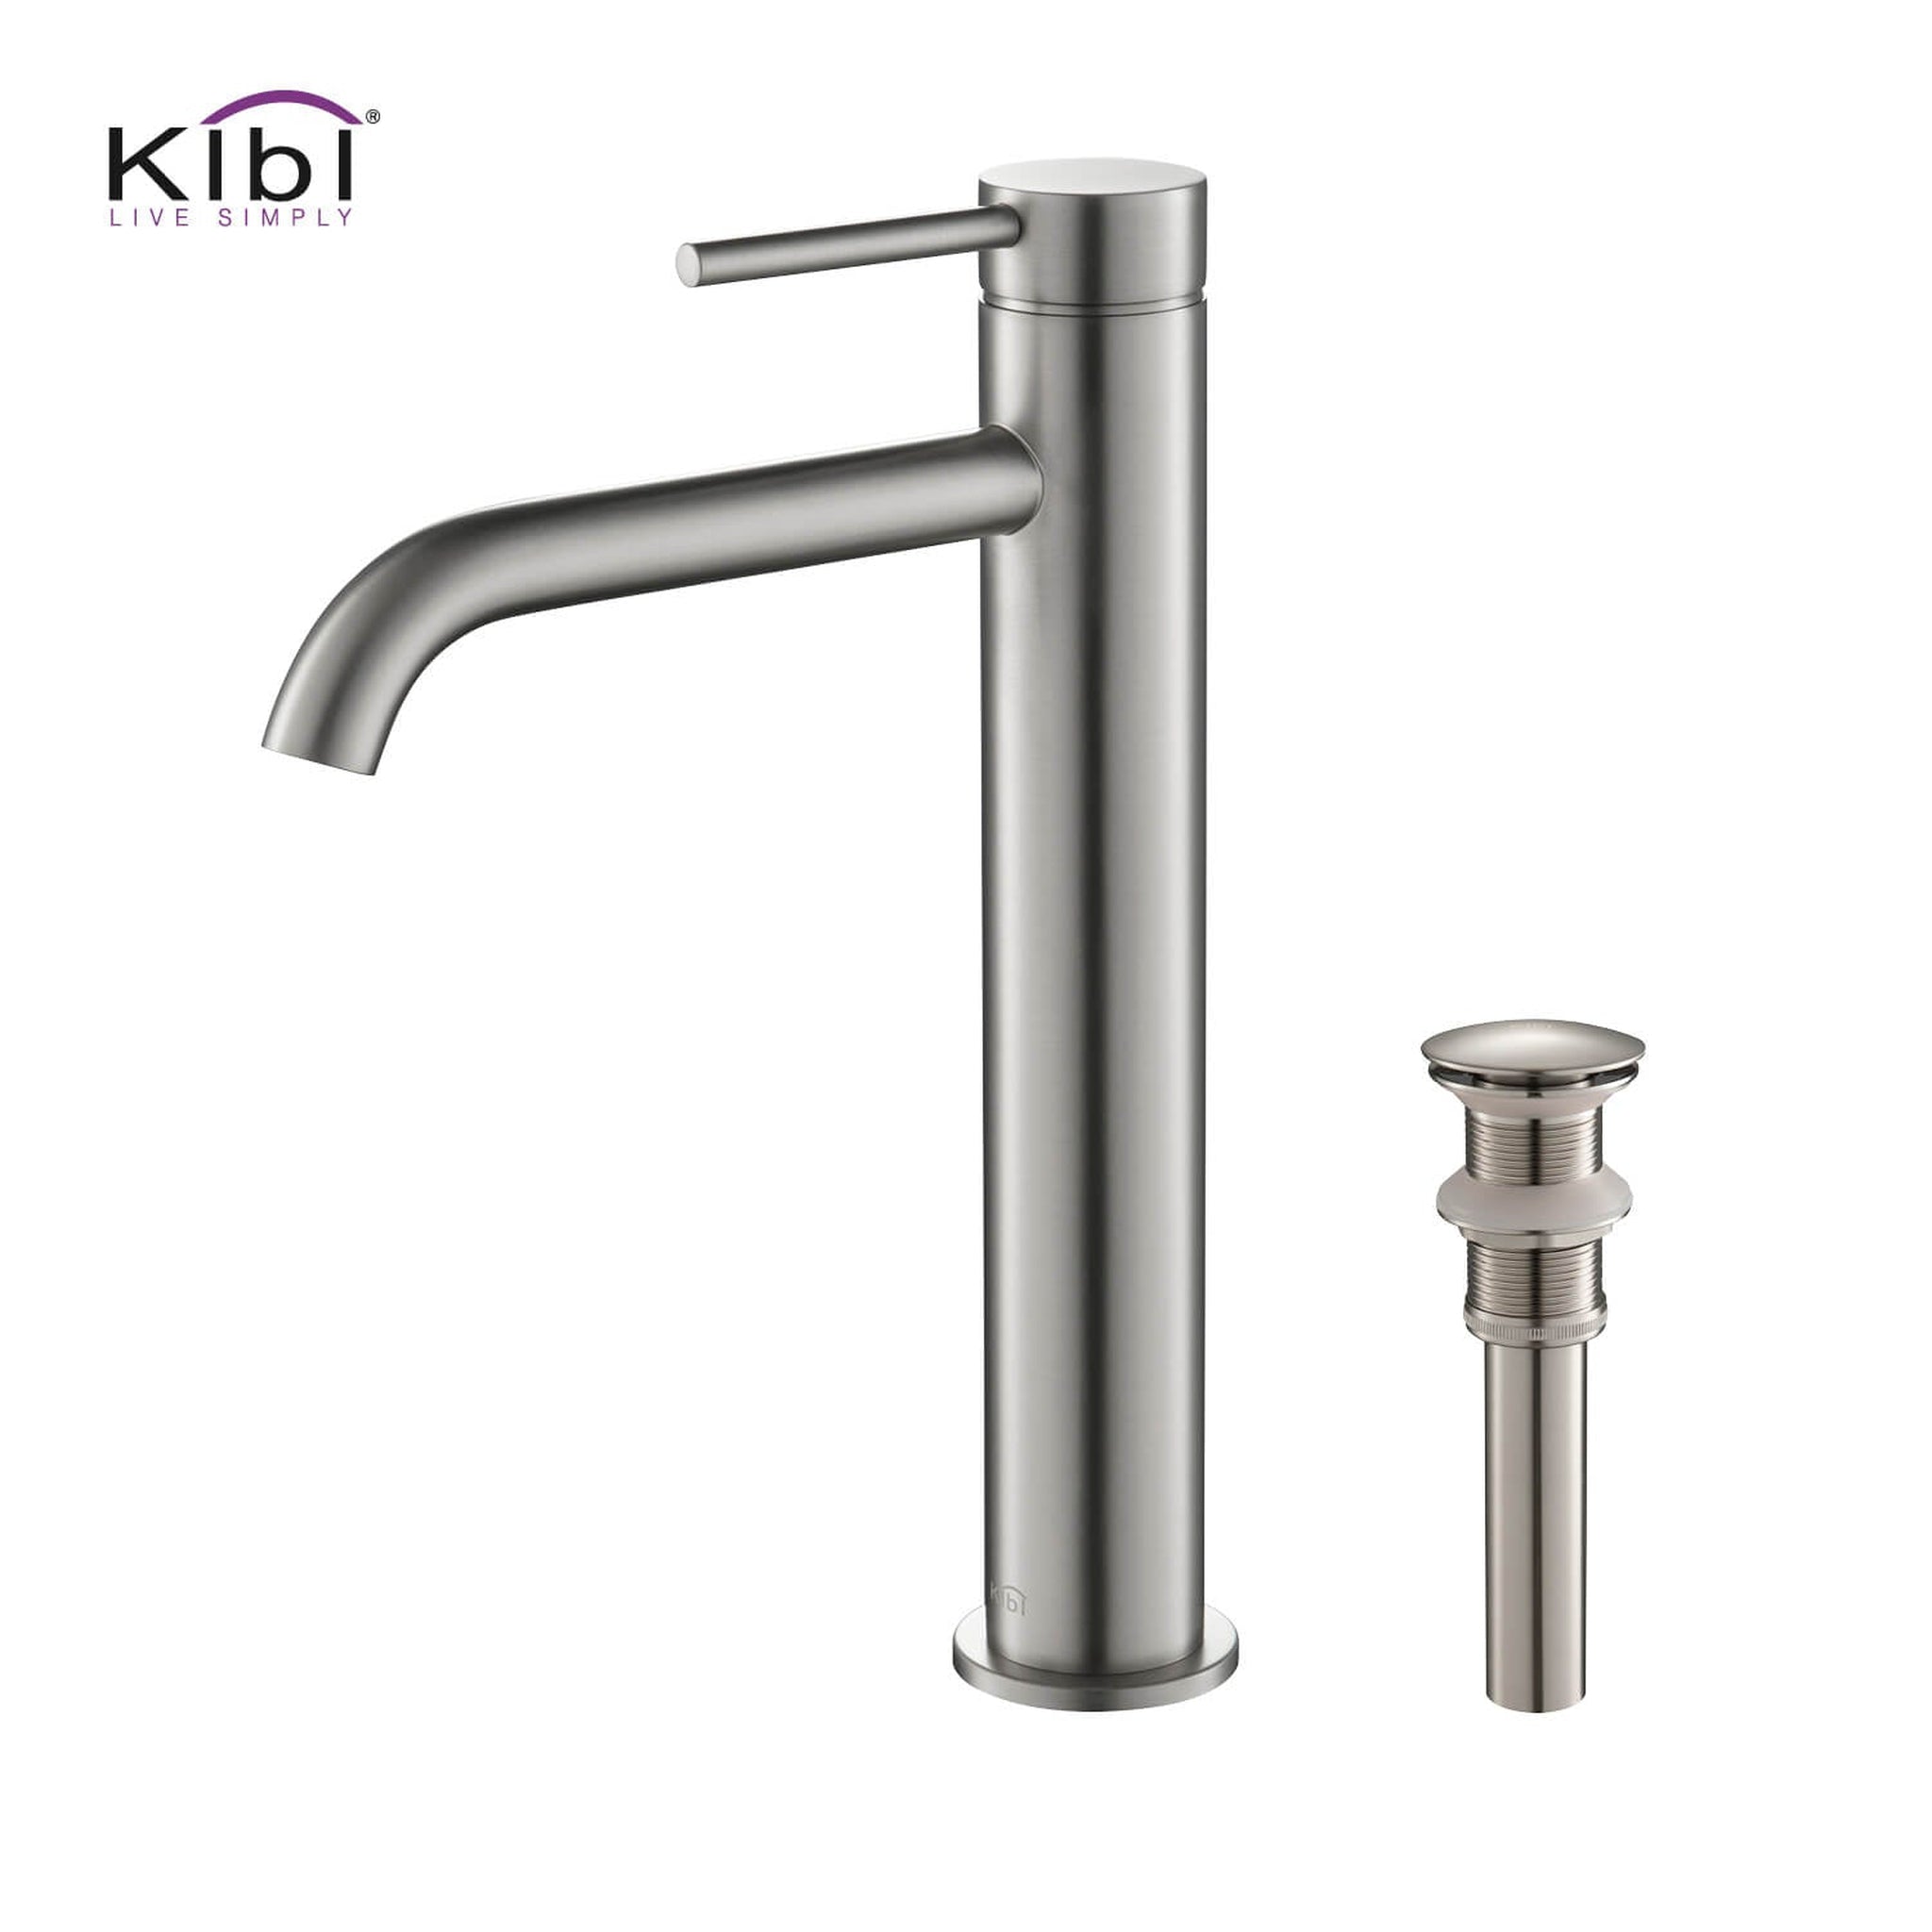 KIBI, KIBI Circular Single Handle Brushed Nickel Solid Brass Bathroom Vessel Sink Faucet With Pop-Up Drain Stopper Small Cover Without Overflow